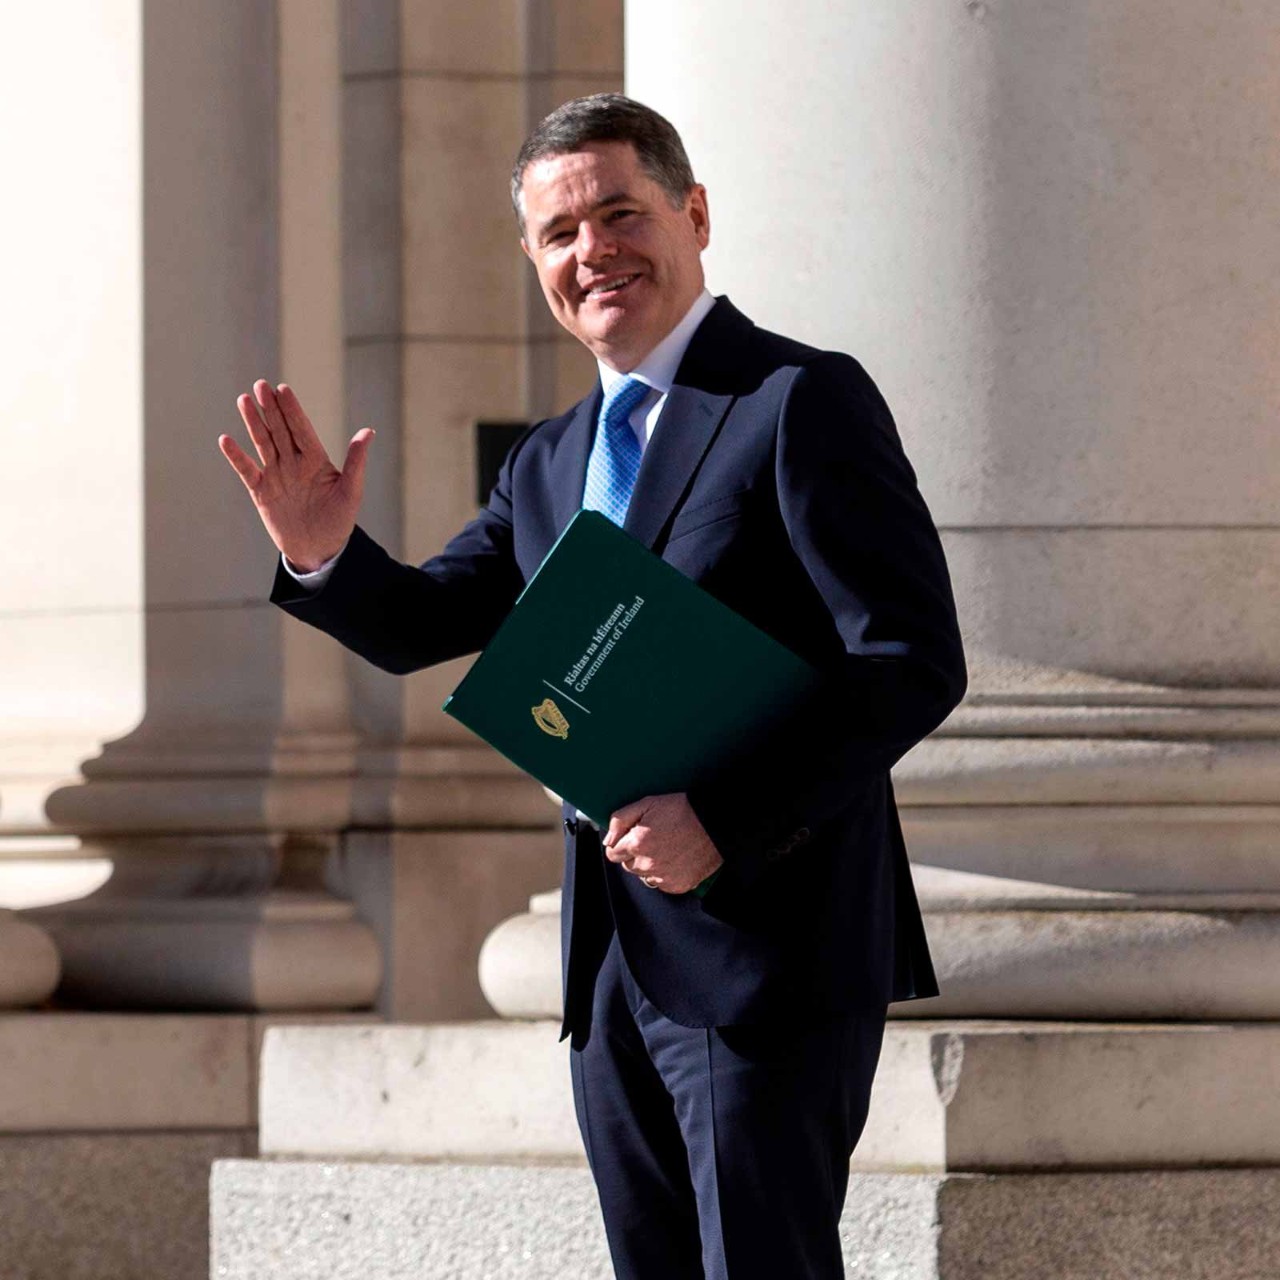 Minister for Finance Paschal Donohoe published Ireland’s Corporation Tax Roadmap January 2021 Update, outlining the government's agenda for engaging with international tax reform